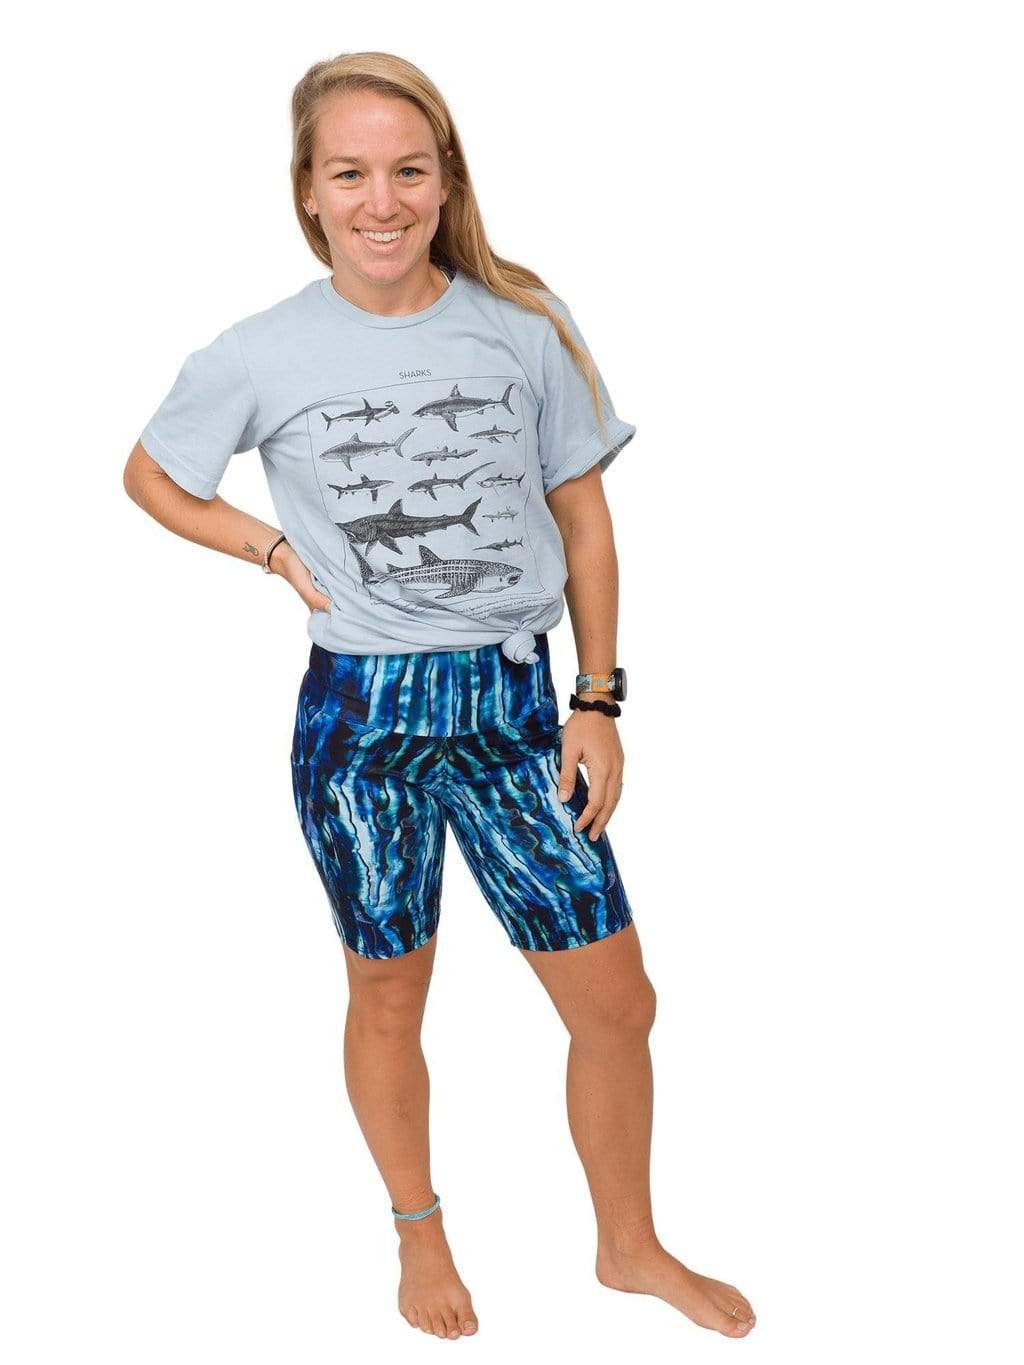 Model: Erin is a coral ecologist and Program Manager here at Waterlust. She 4&#39;11&quot;, 110 lbs, 32A and is wearing an XS tee.